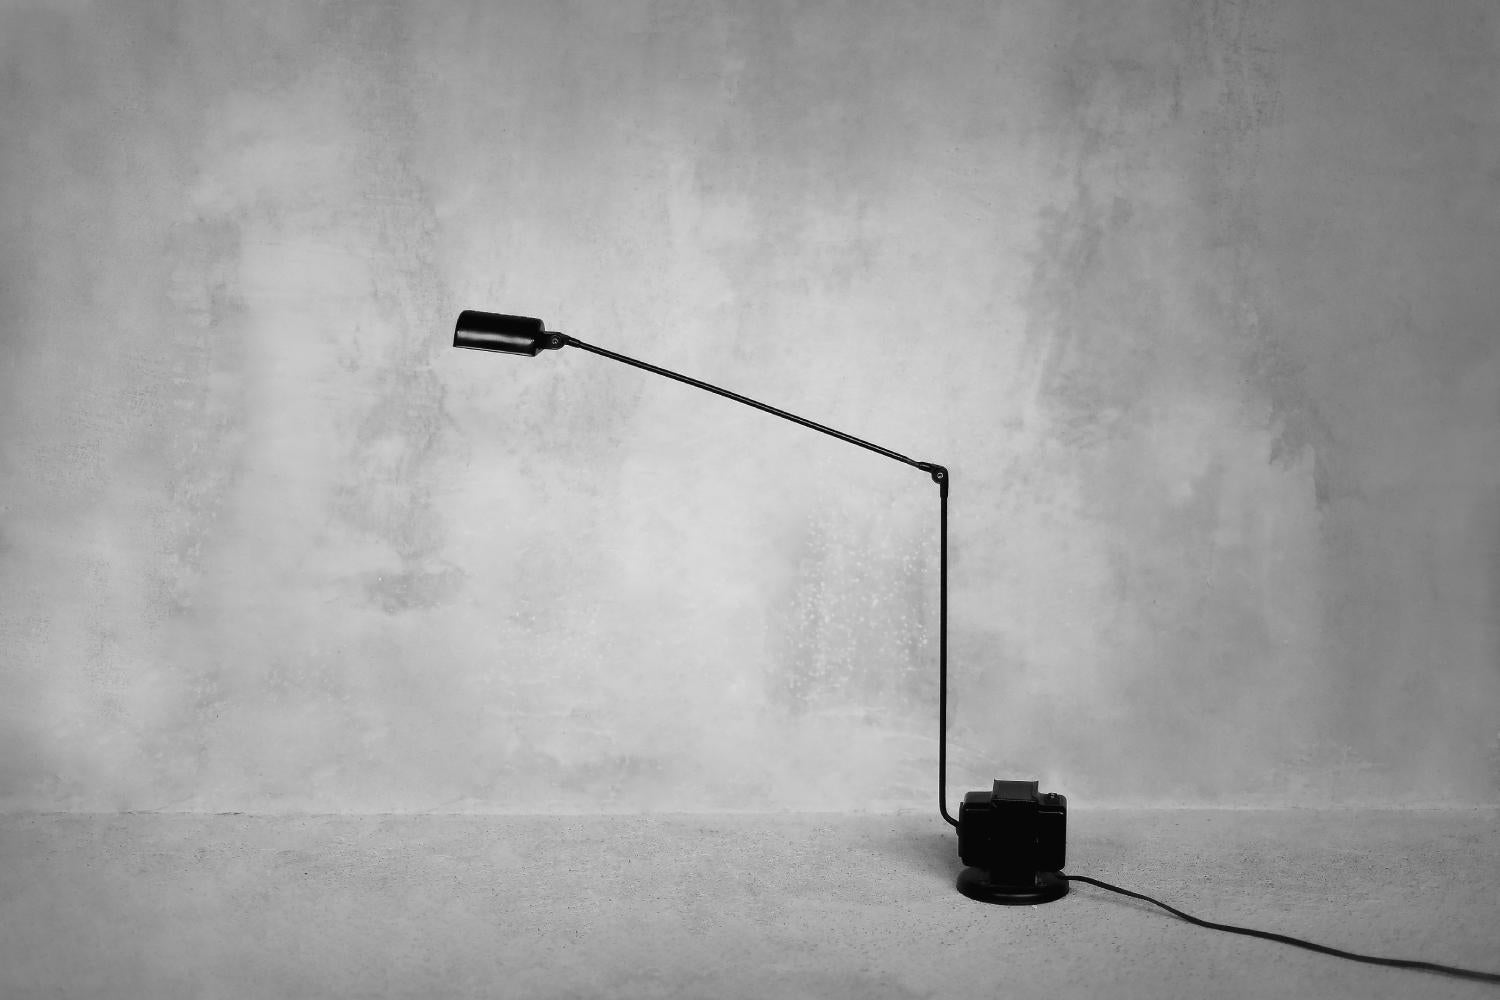 This minimalist and elegant Daphine table lamp was designed by Tommaso Cimini for the Italian manufacturer Lumina during the 1980s. The prototype of the lamp was created in 1975 for the design fair in Milan as the simplest table lamp. The lamp comes